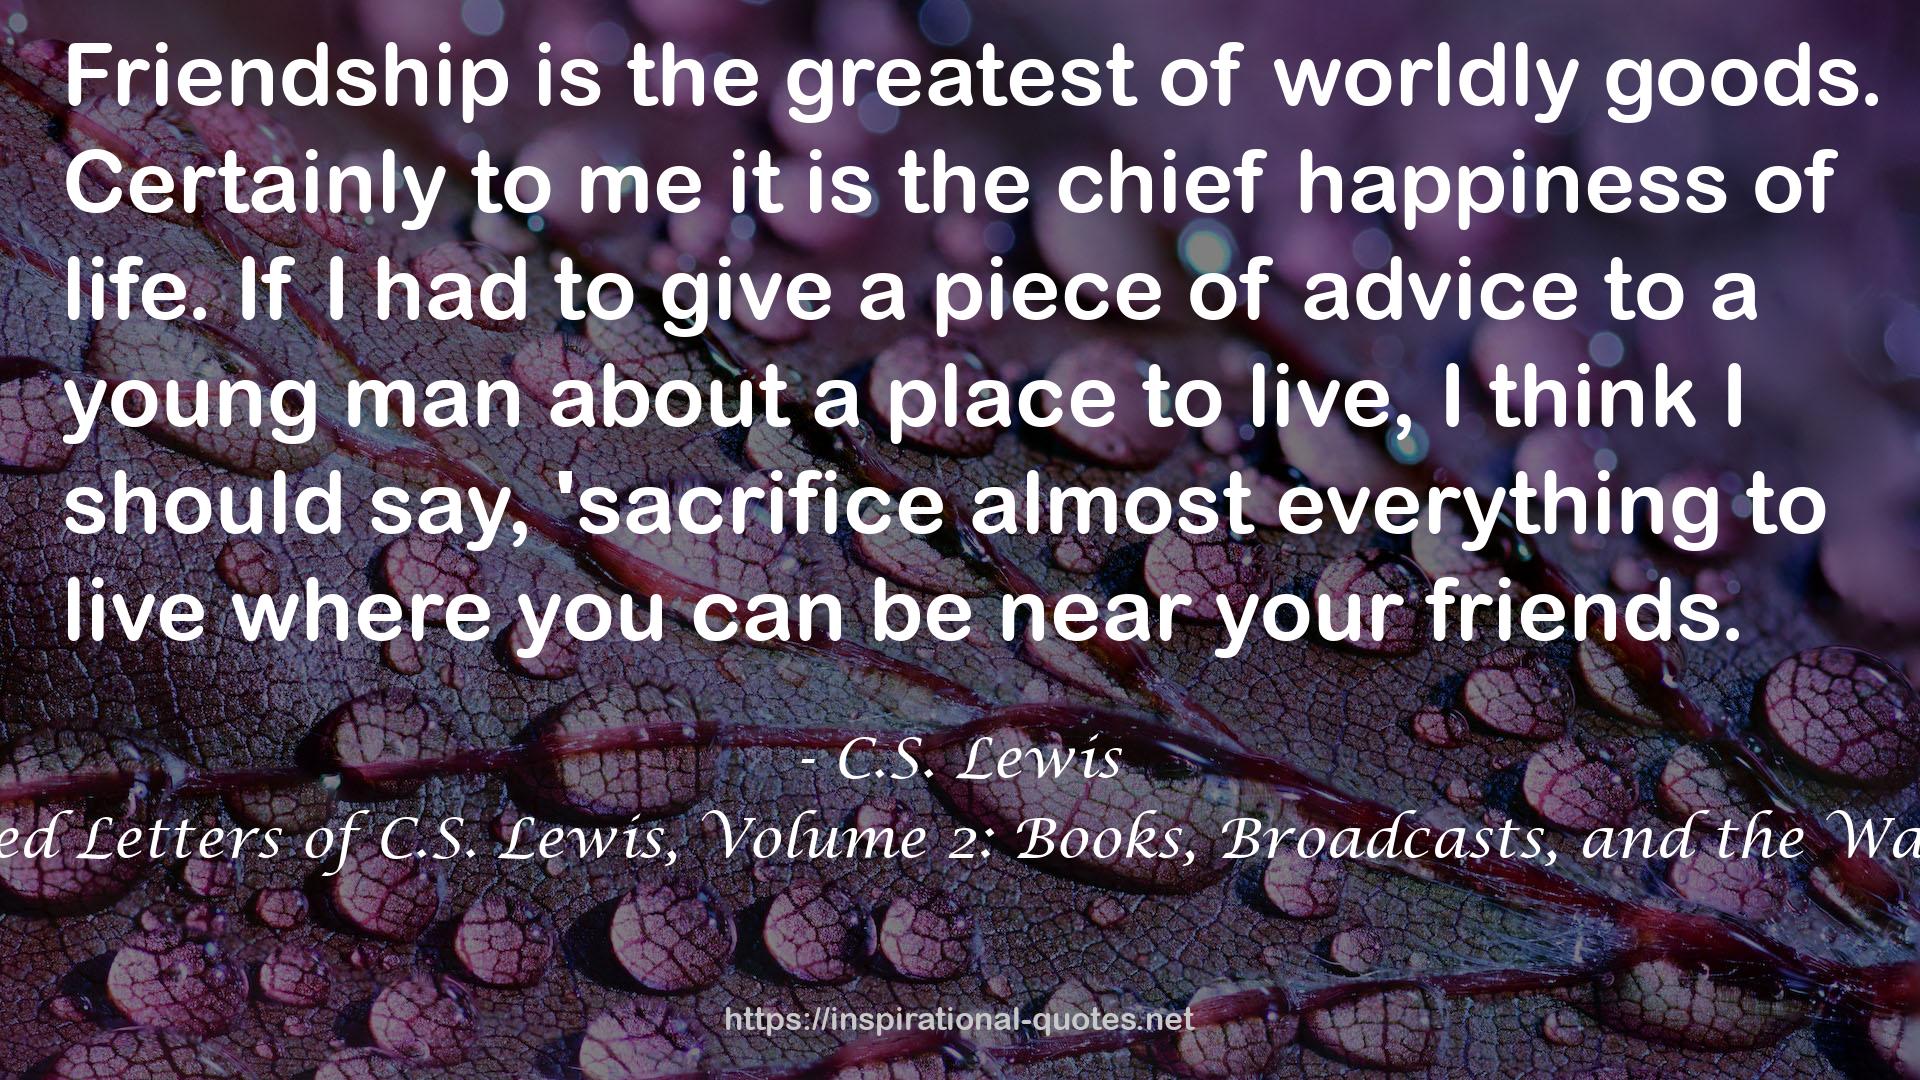 The Collected Letters of C.S. Lewis, Volume 2: Books, Broadcasts, and the War, 1931-1949 QUOTES